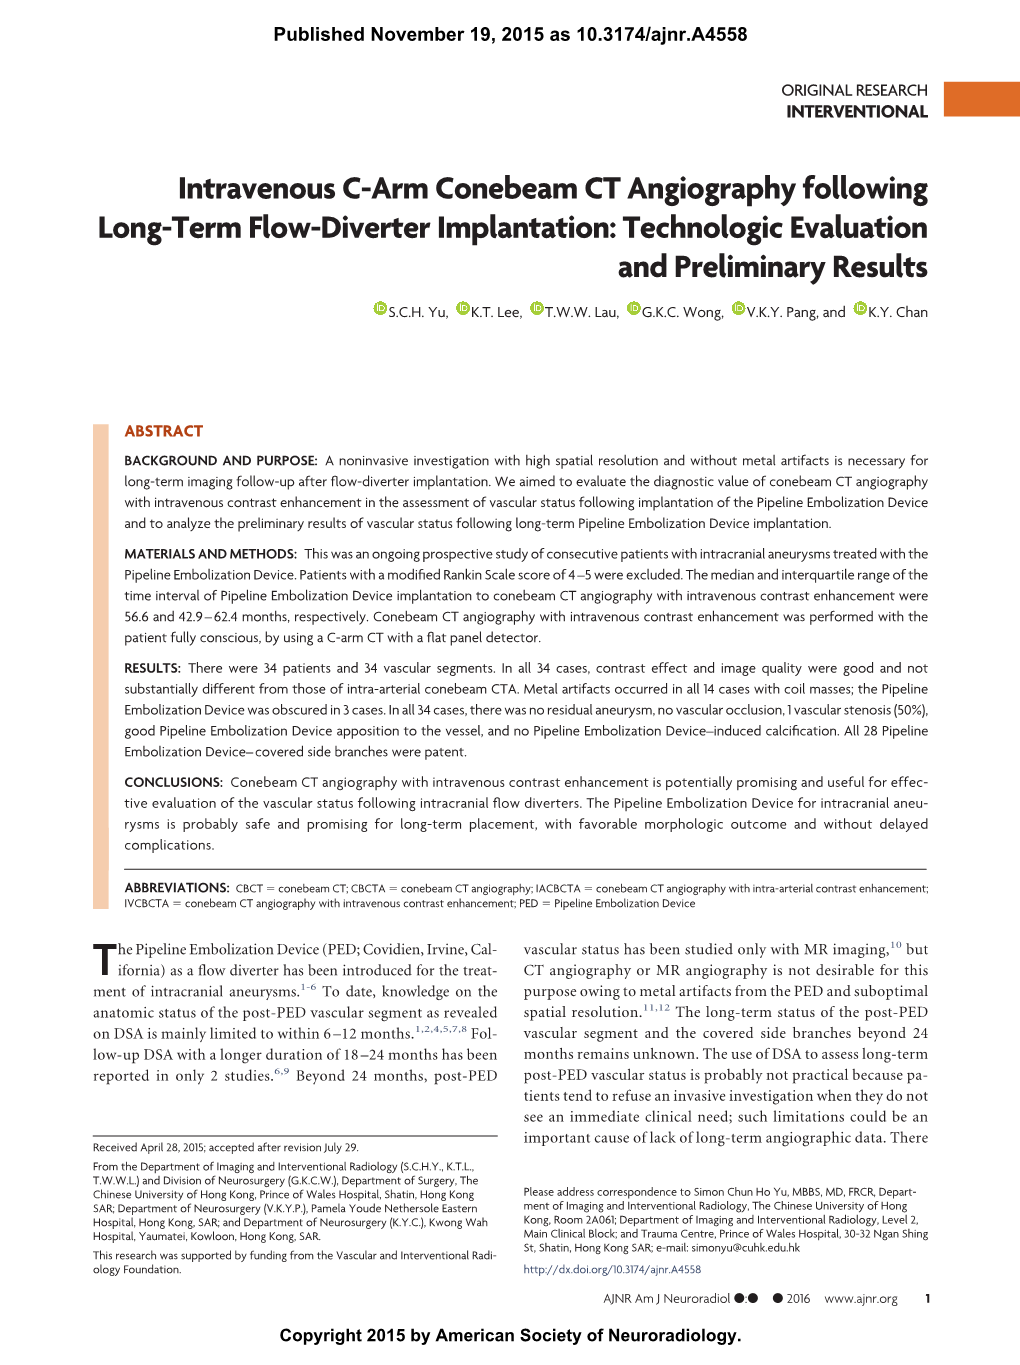 Intravenous C-Arm Conebeam CT Angiography Following Long-Term Flow-Diverter Implantation: Technologic Evaluation and Preliminary Results